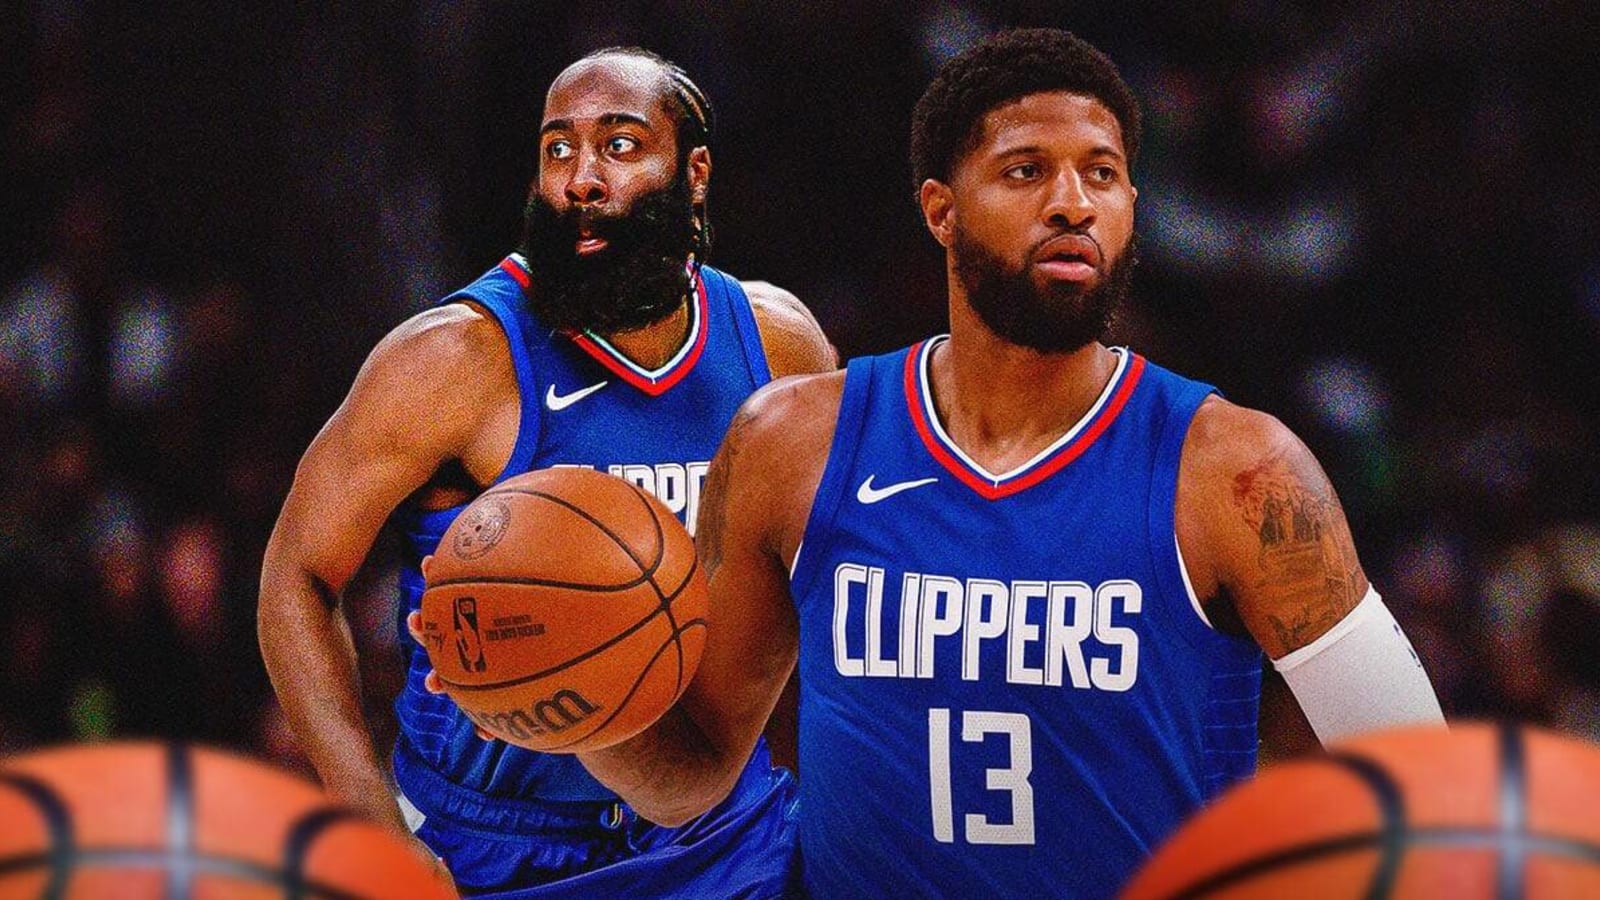 The Clippers’ plans for Paul George and James Harden, per Lawrence Frank